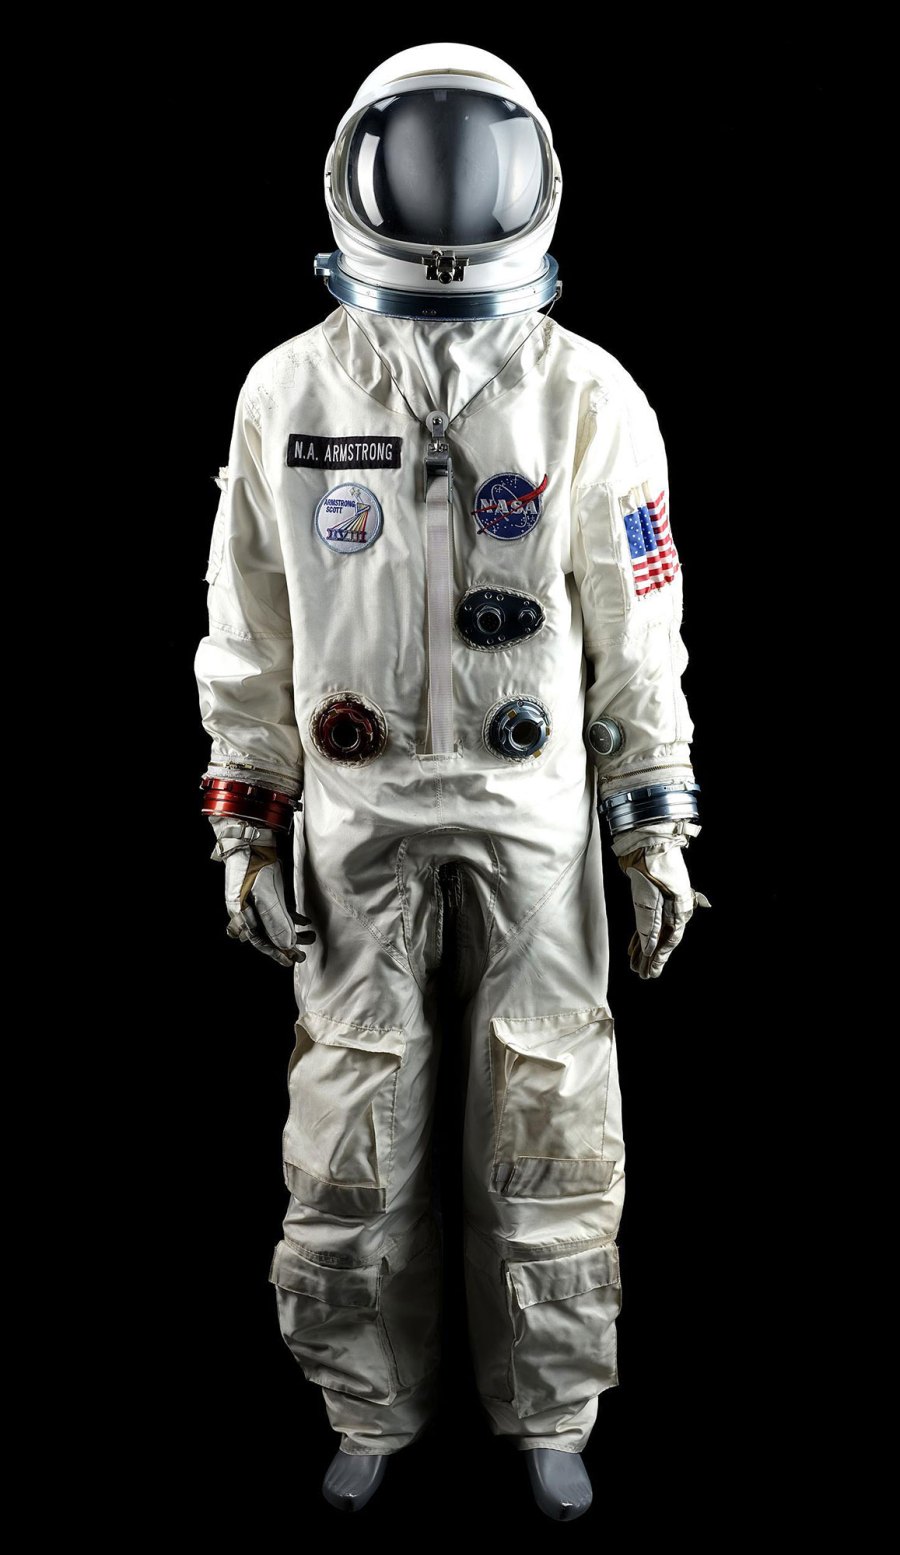 Neil Armstrong Ryan Gosling Gemini Spacesuit Auction